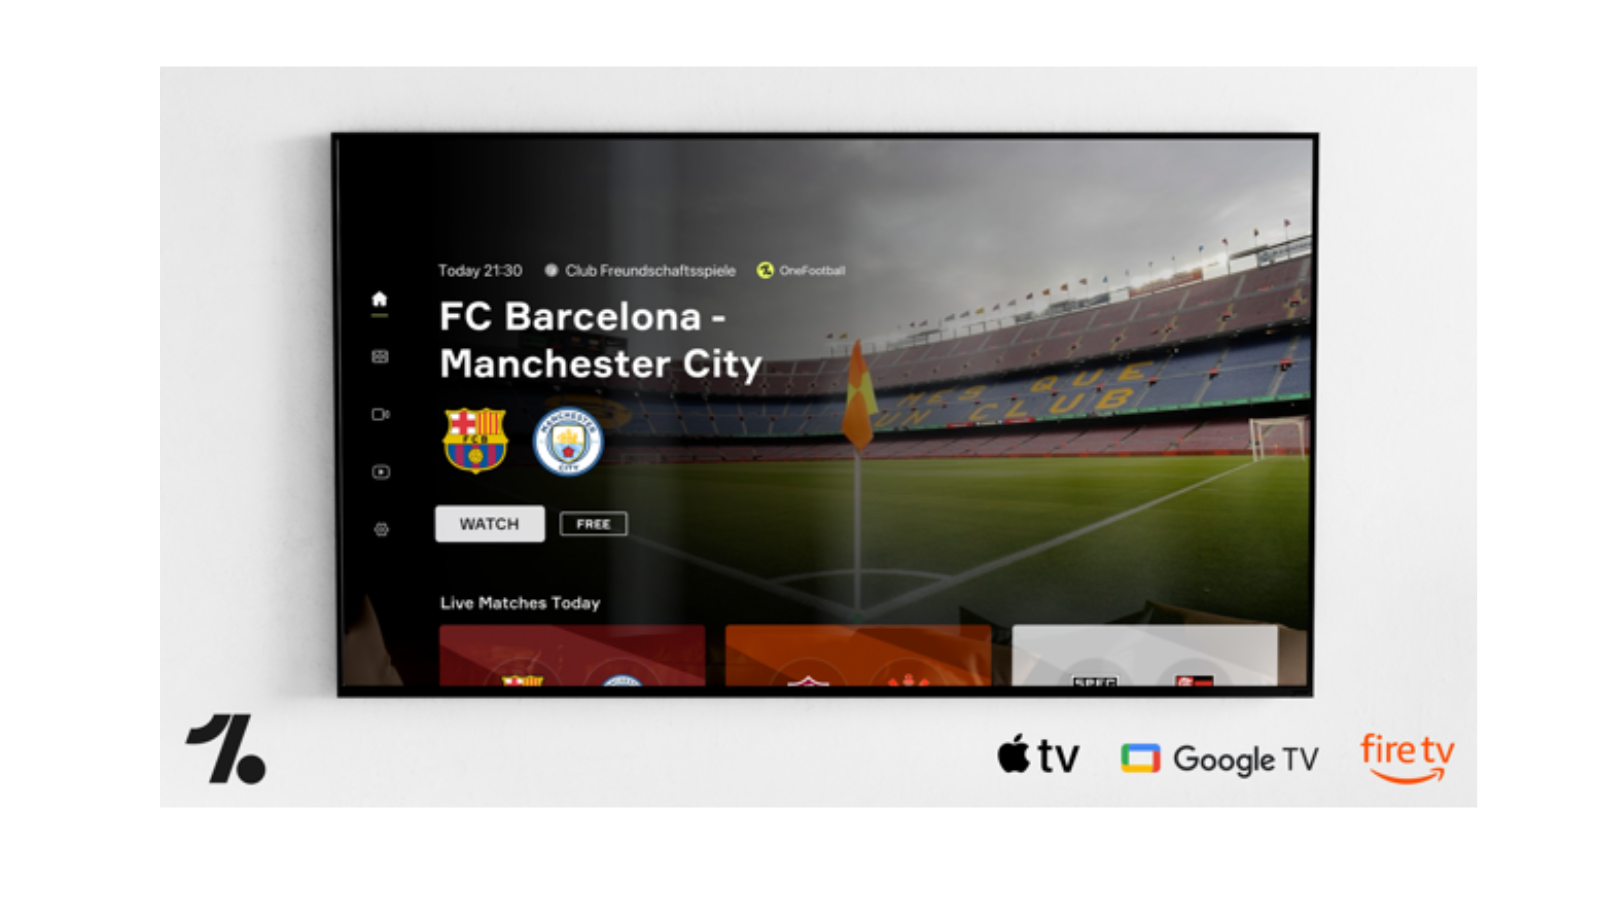 OneFootball launches first TV app